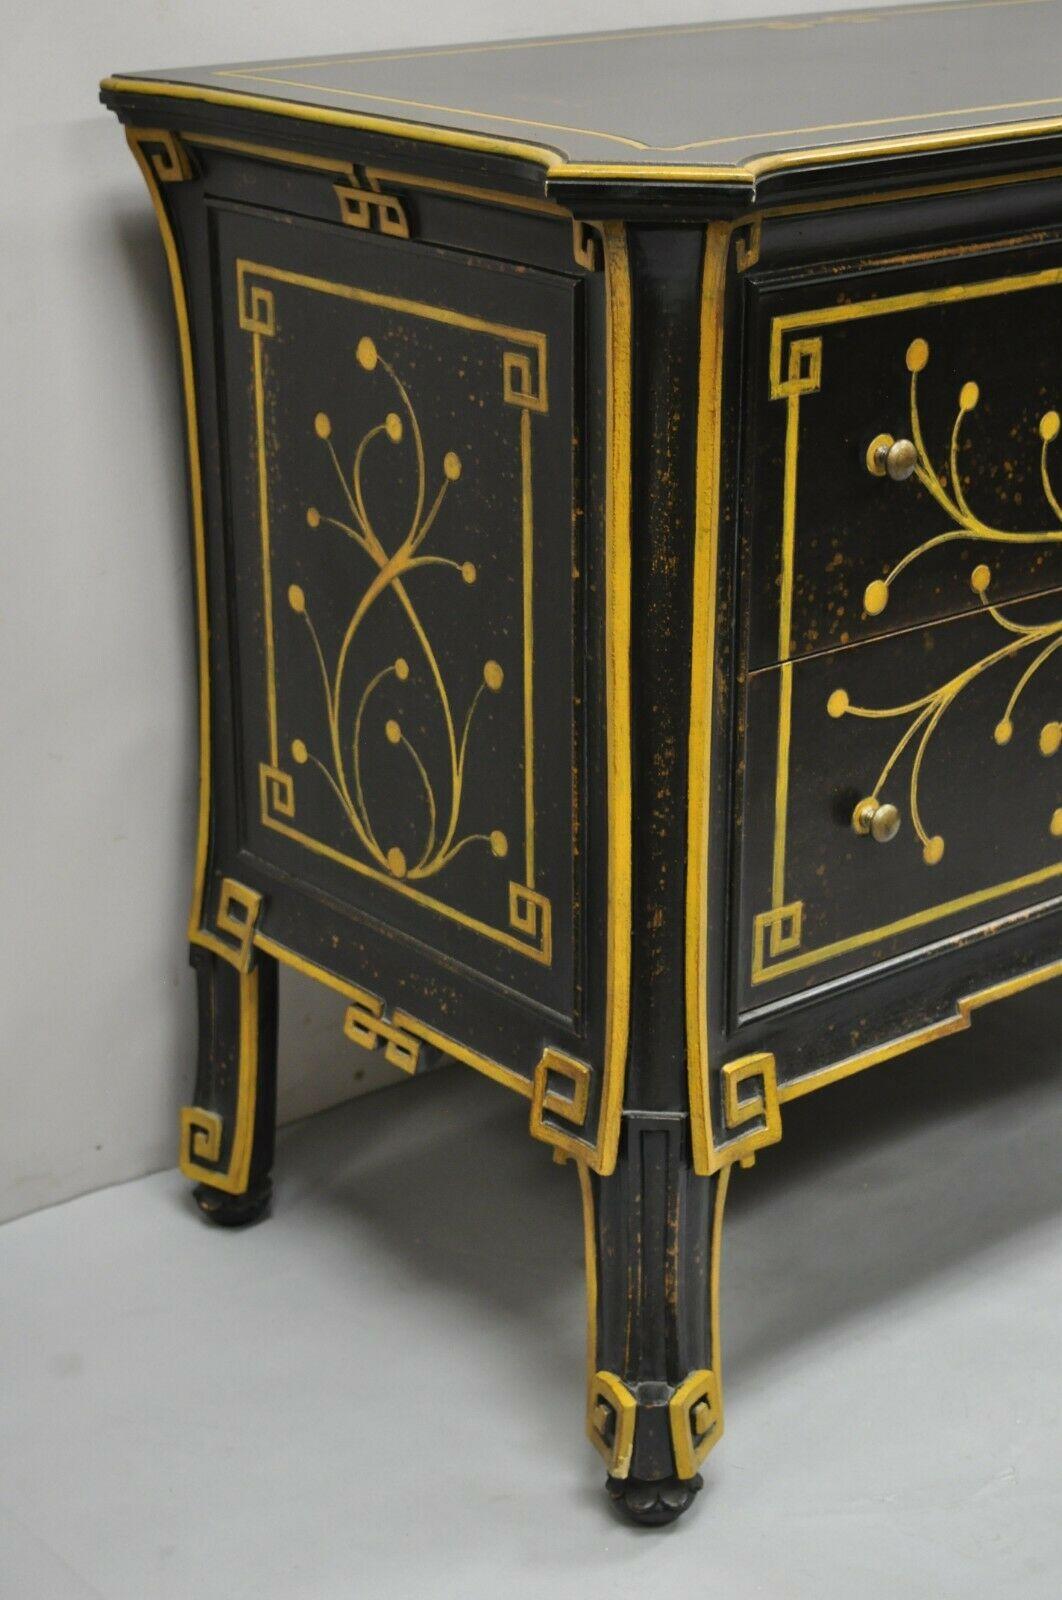 Decorative Crafts Inc Black Ebonized Regency 2 Drawer Commode Dresser Chest In Good Condition For Sale In Philadelphia, PA